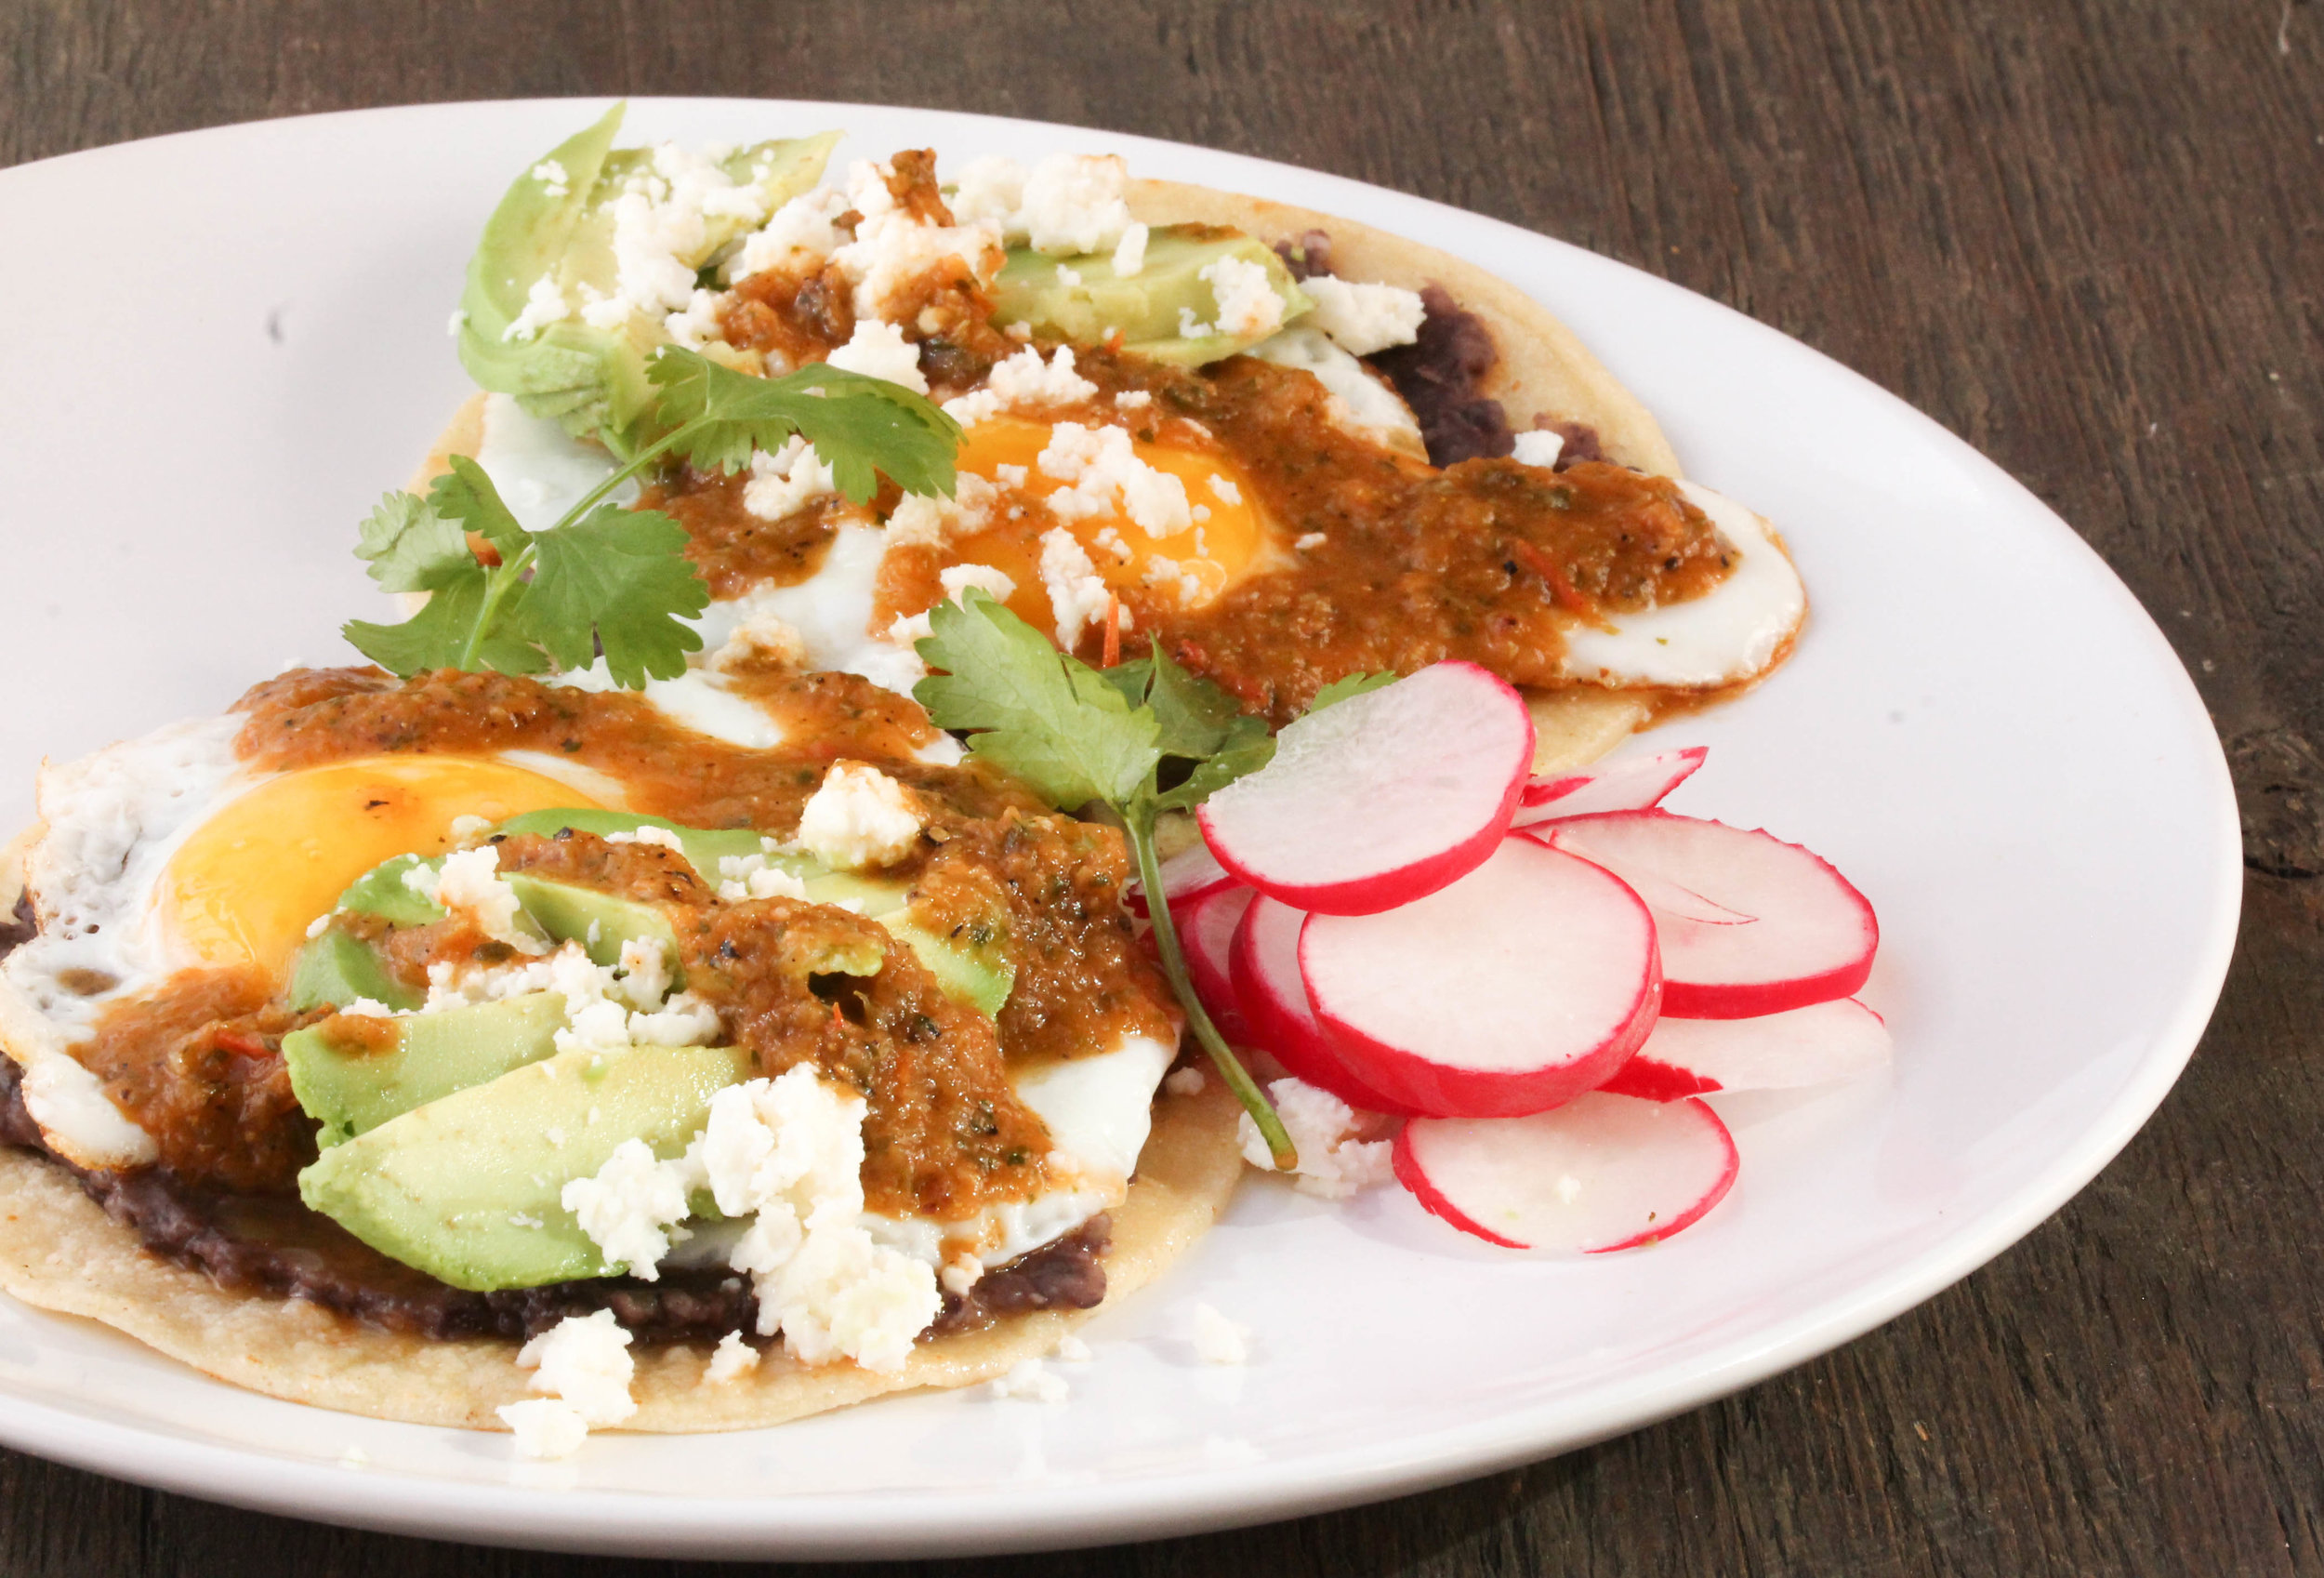 Entertain your guests with Huevos Rancheros, a popular Mexican breakfast from the comfort of your own kitchen! It's easy, wholesome, delicious, and naturally gluten-free.